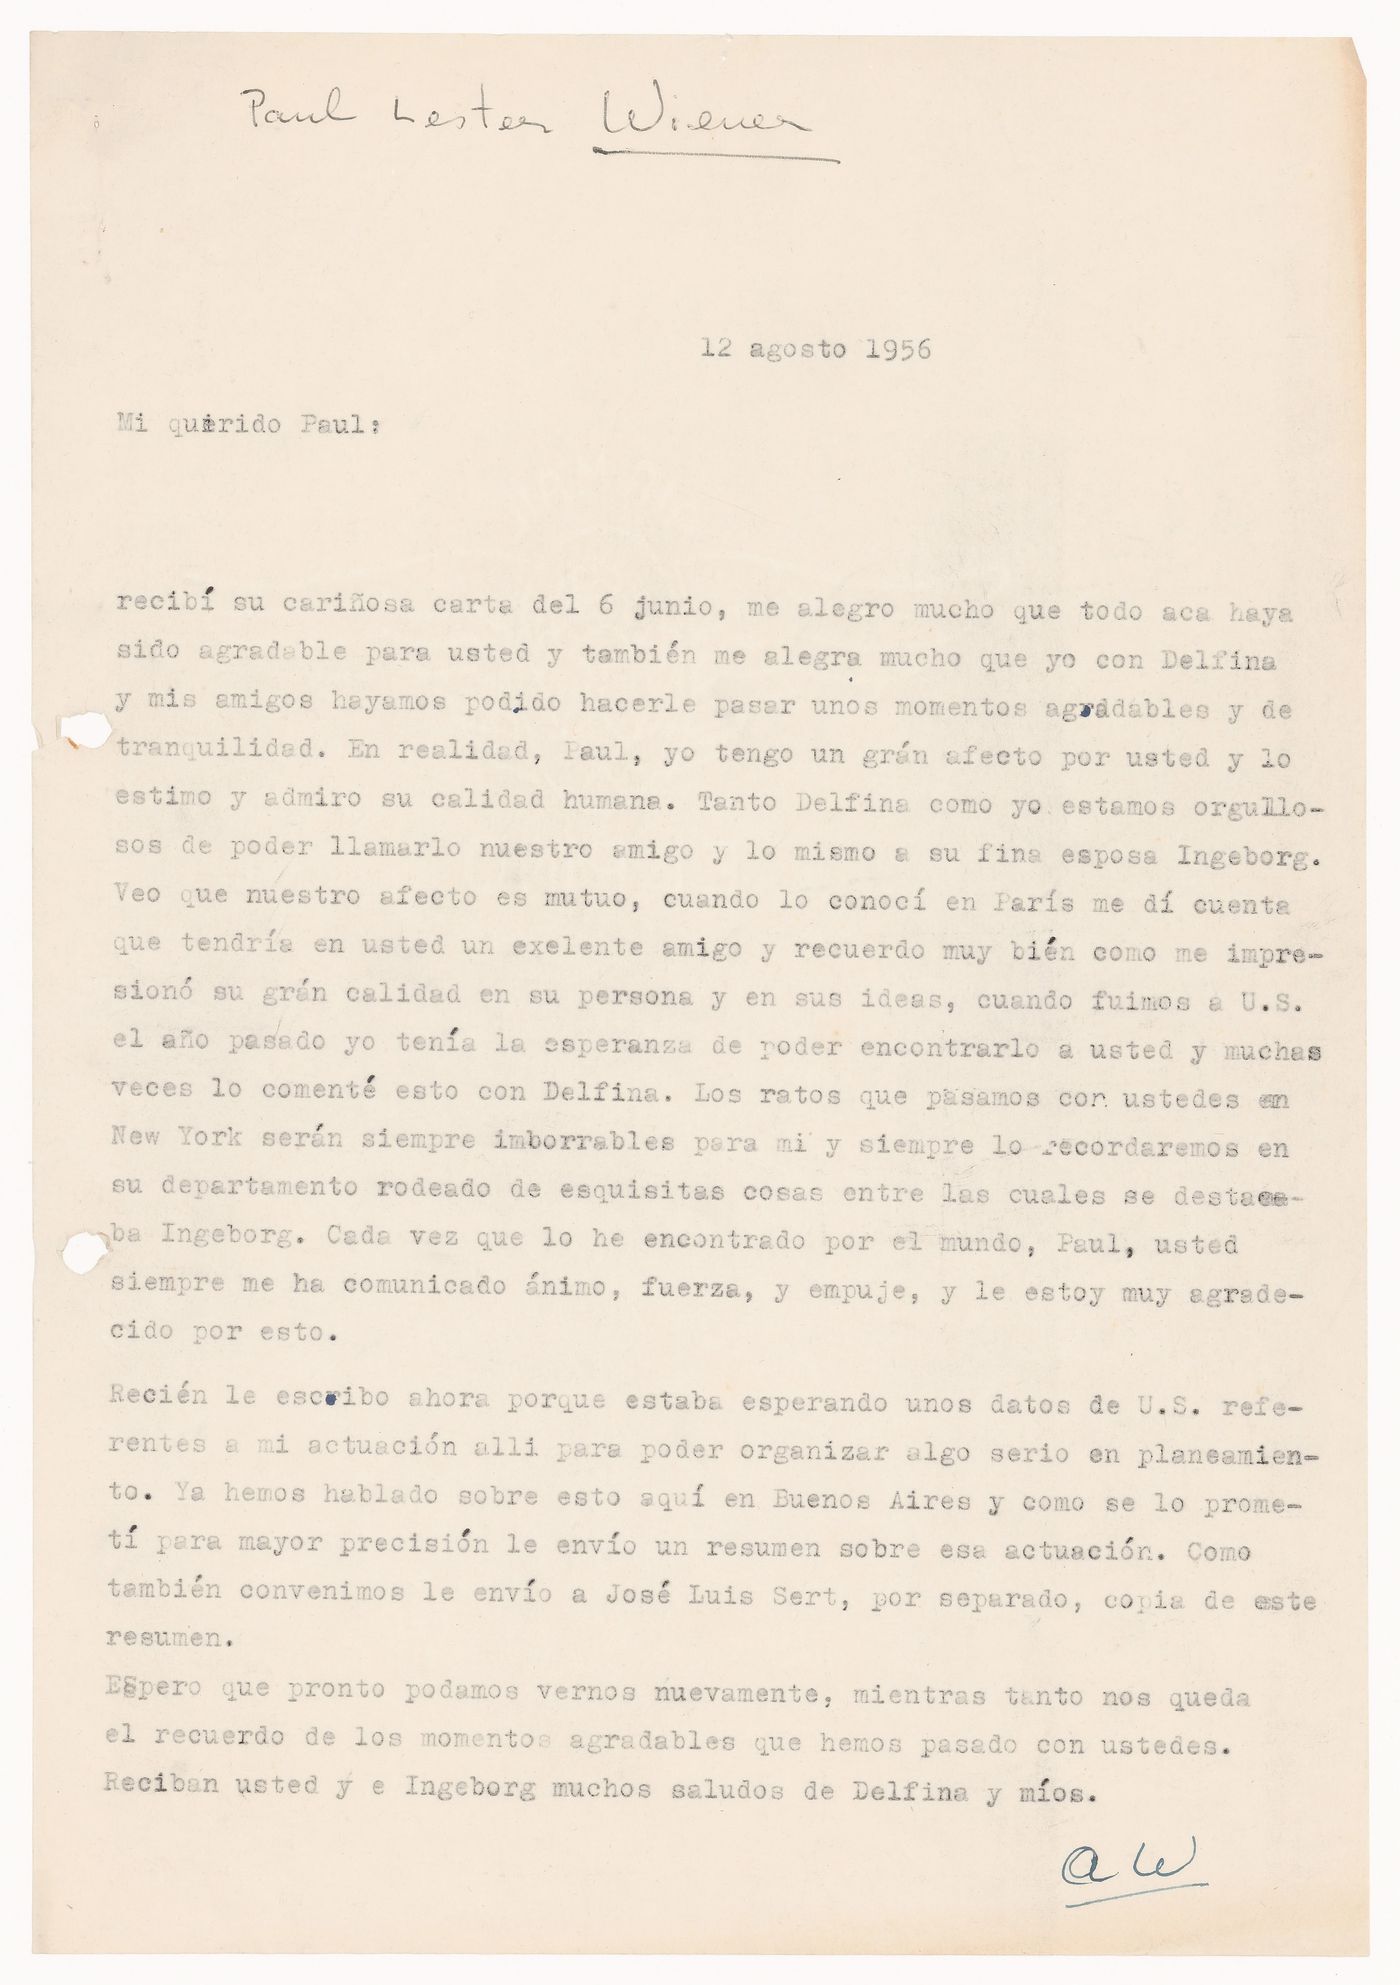 Correspondence, letter to Paul Leister Weiner from Amancio Williams